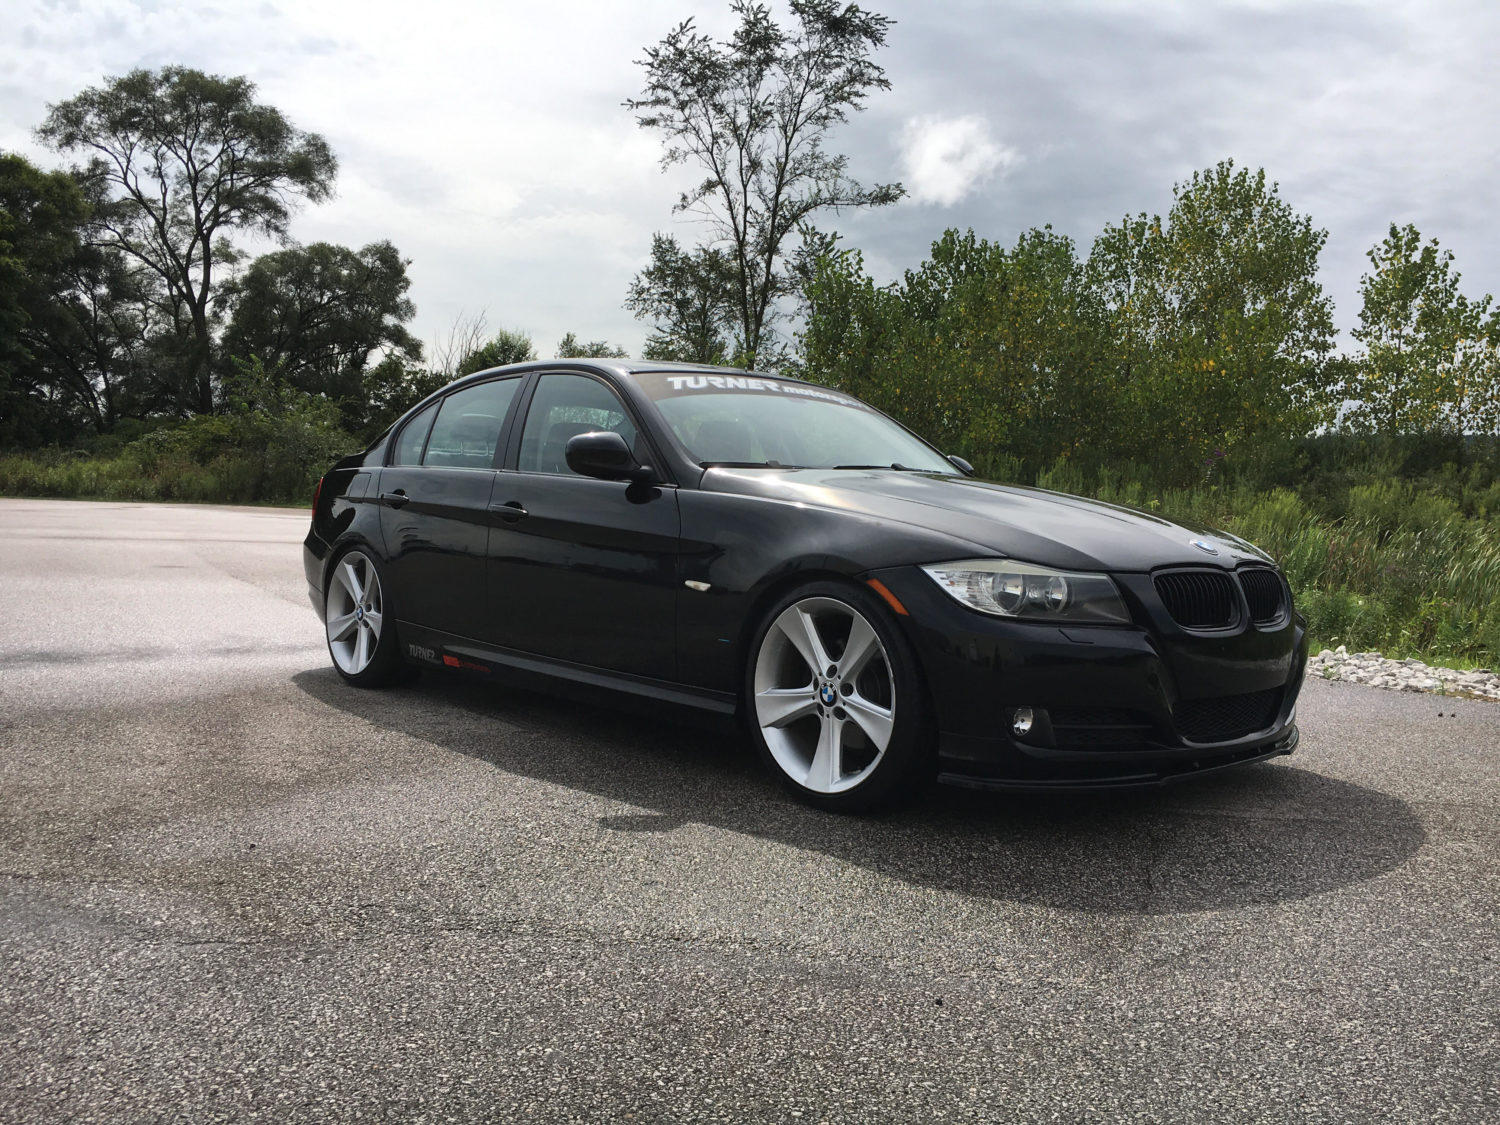 A Love Letter To BMW's N52 BimmerLife